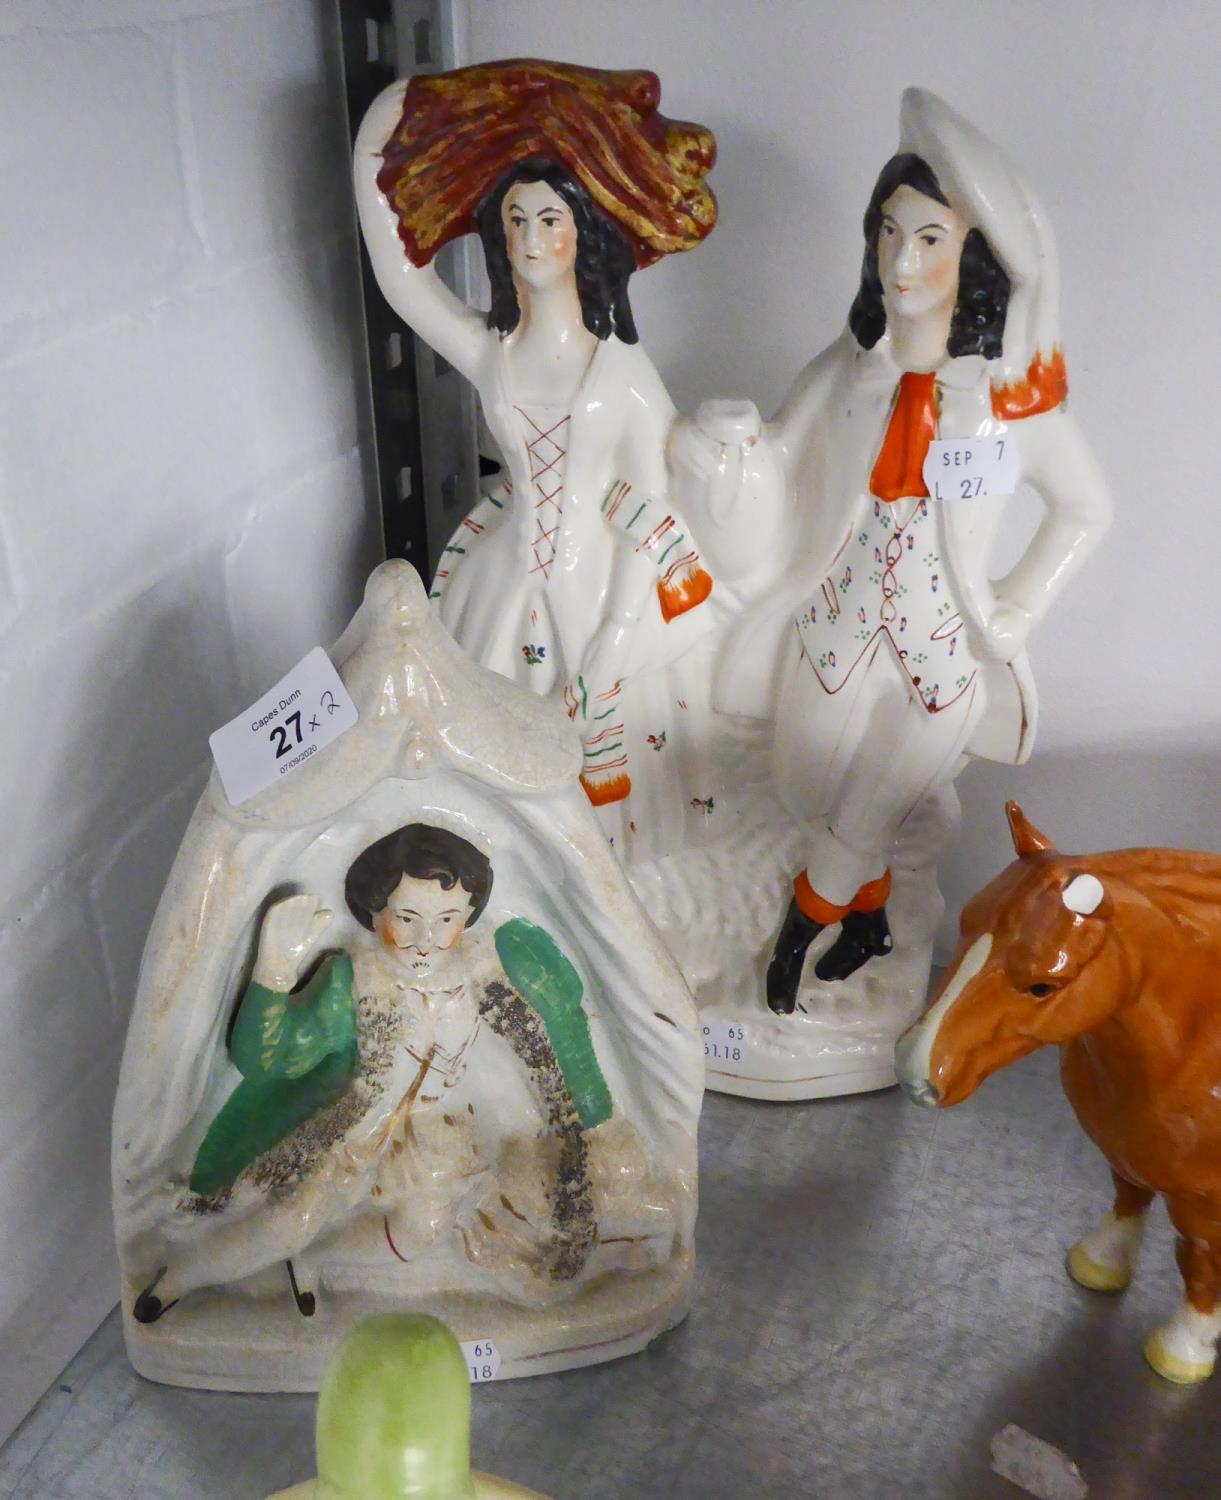 19TH CENTURY STAFFORDSHIRE POTTERY FLAT BACK GROUP OF TWO FIGURES, SHE WITH A WHEATSHEAF ON HER HEAD